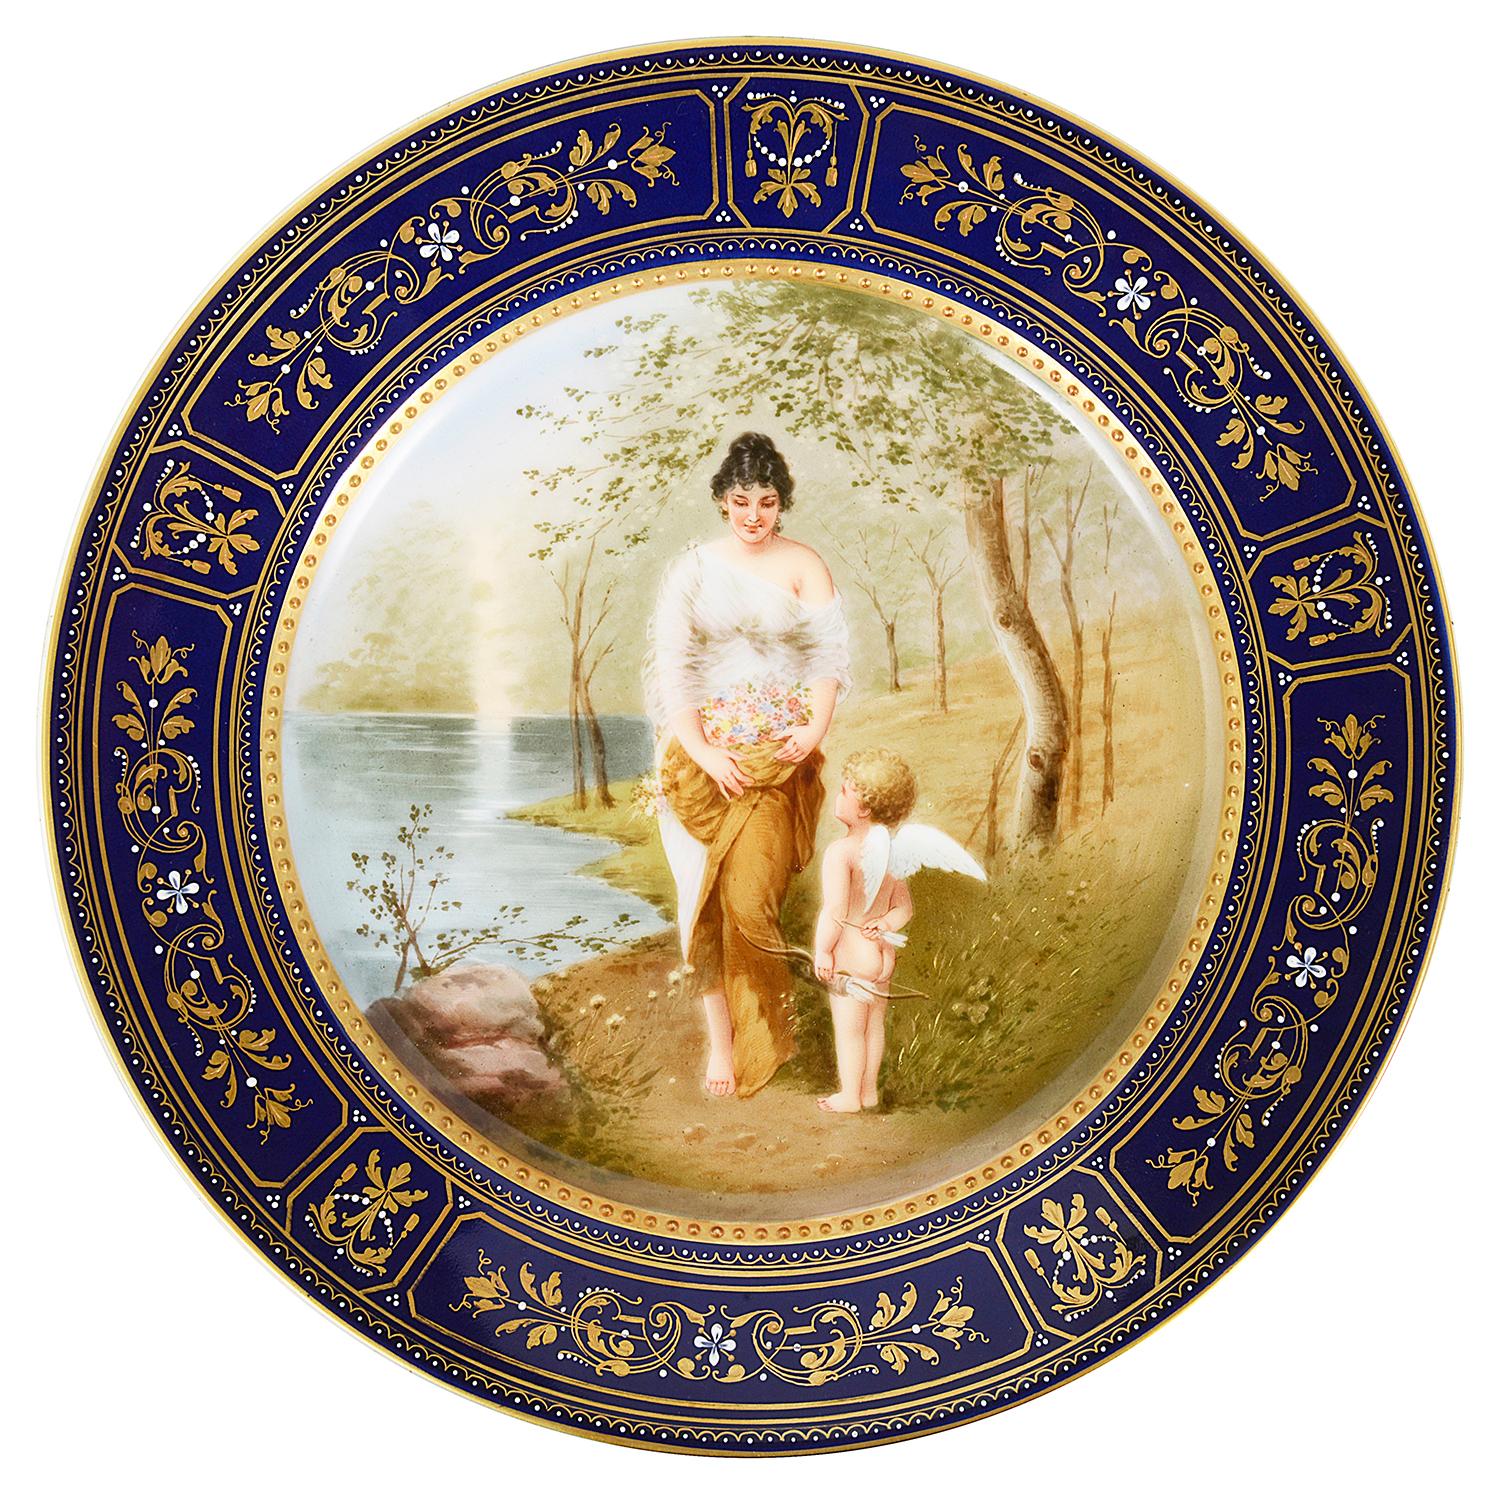 A wonderful collection of twelve late 19th century Vienna porcelain plates, each depicting classical and romantic scenes of women, some with children or cherubs. Having cobalt blue boarders with gilded decoration.
Blue Bee hive marking to the